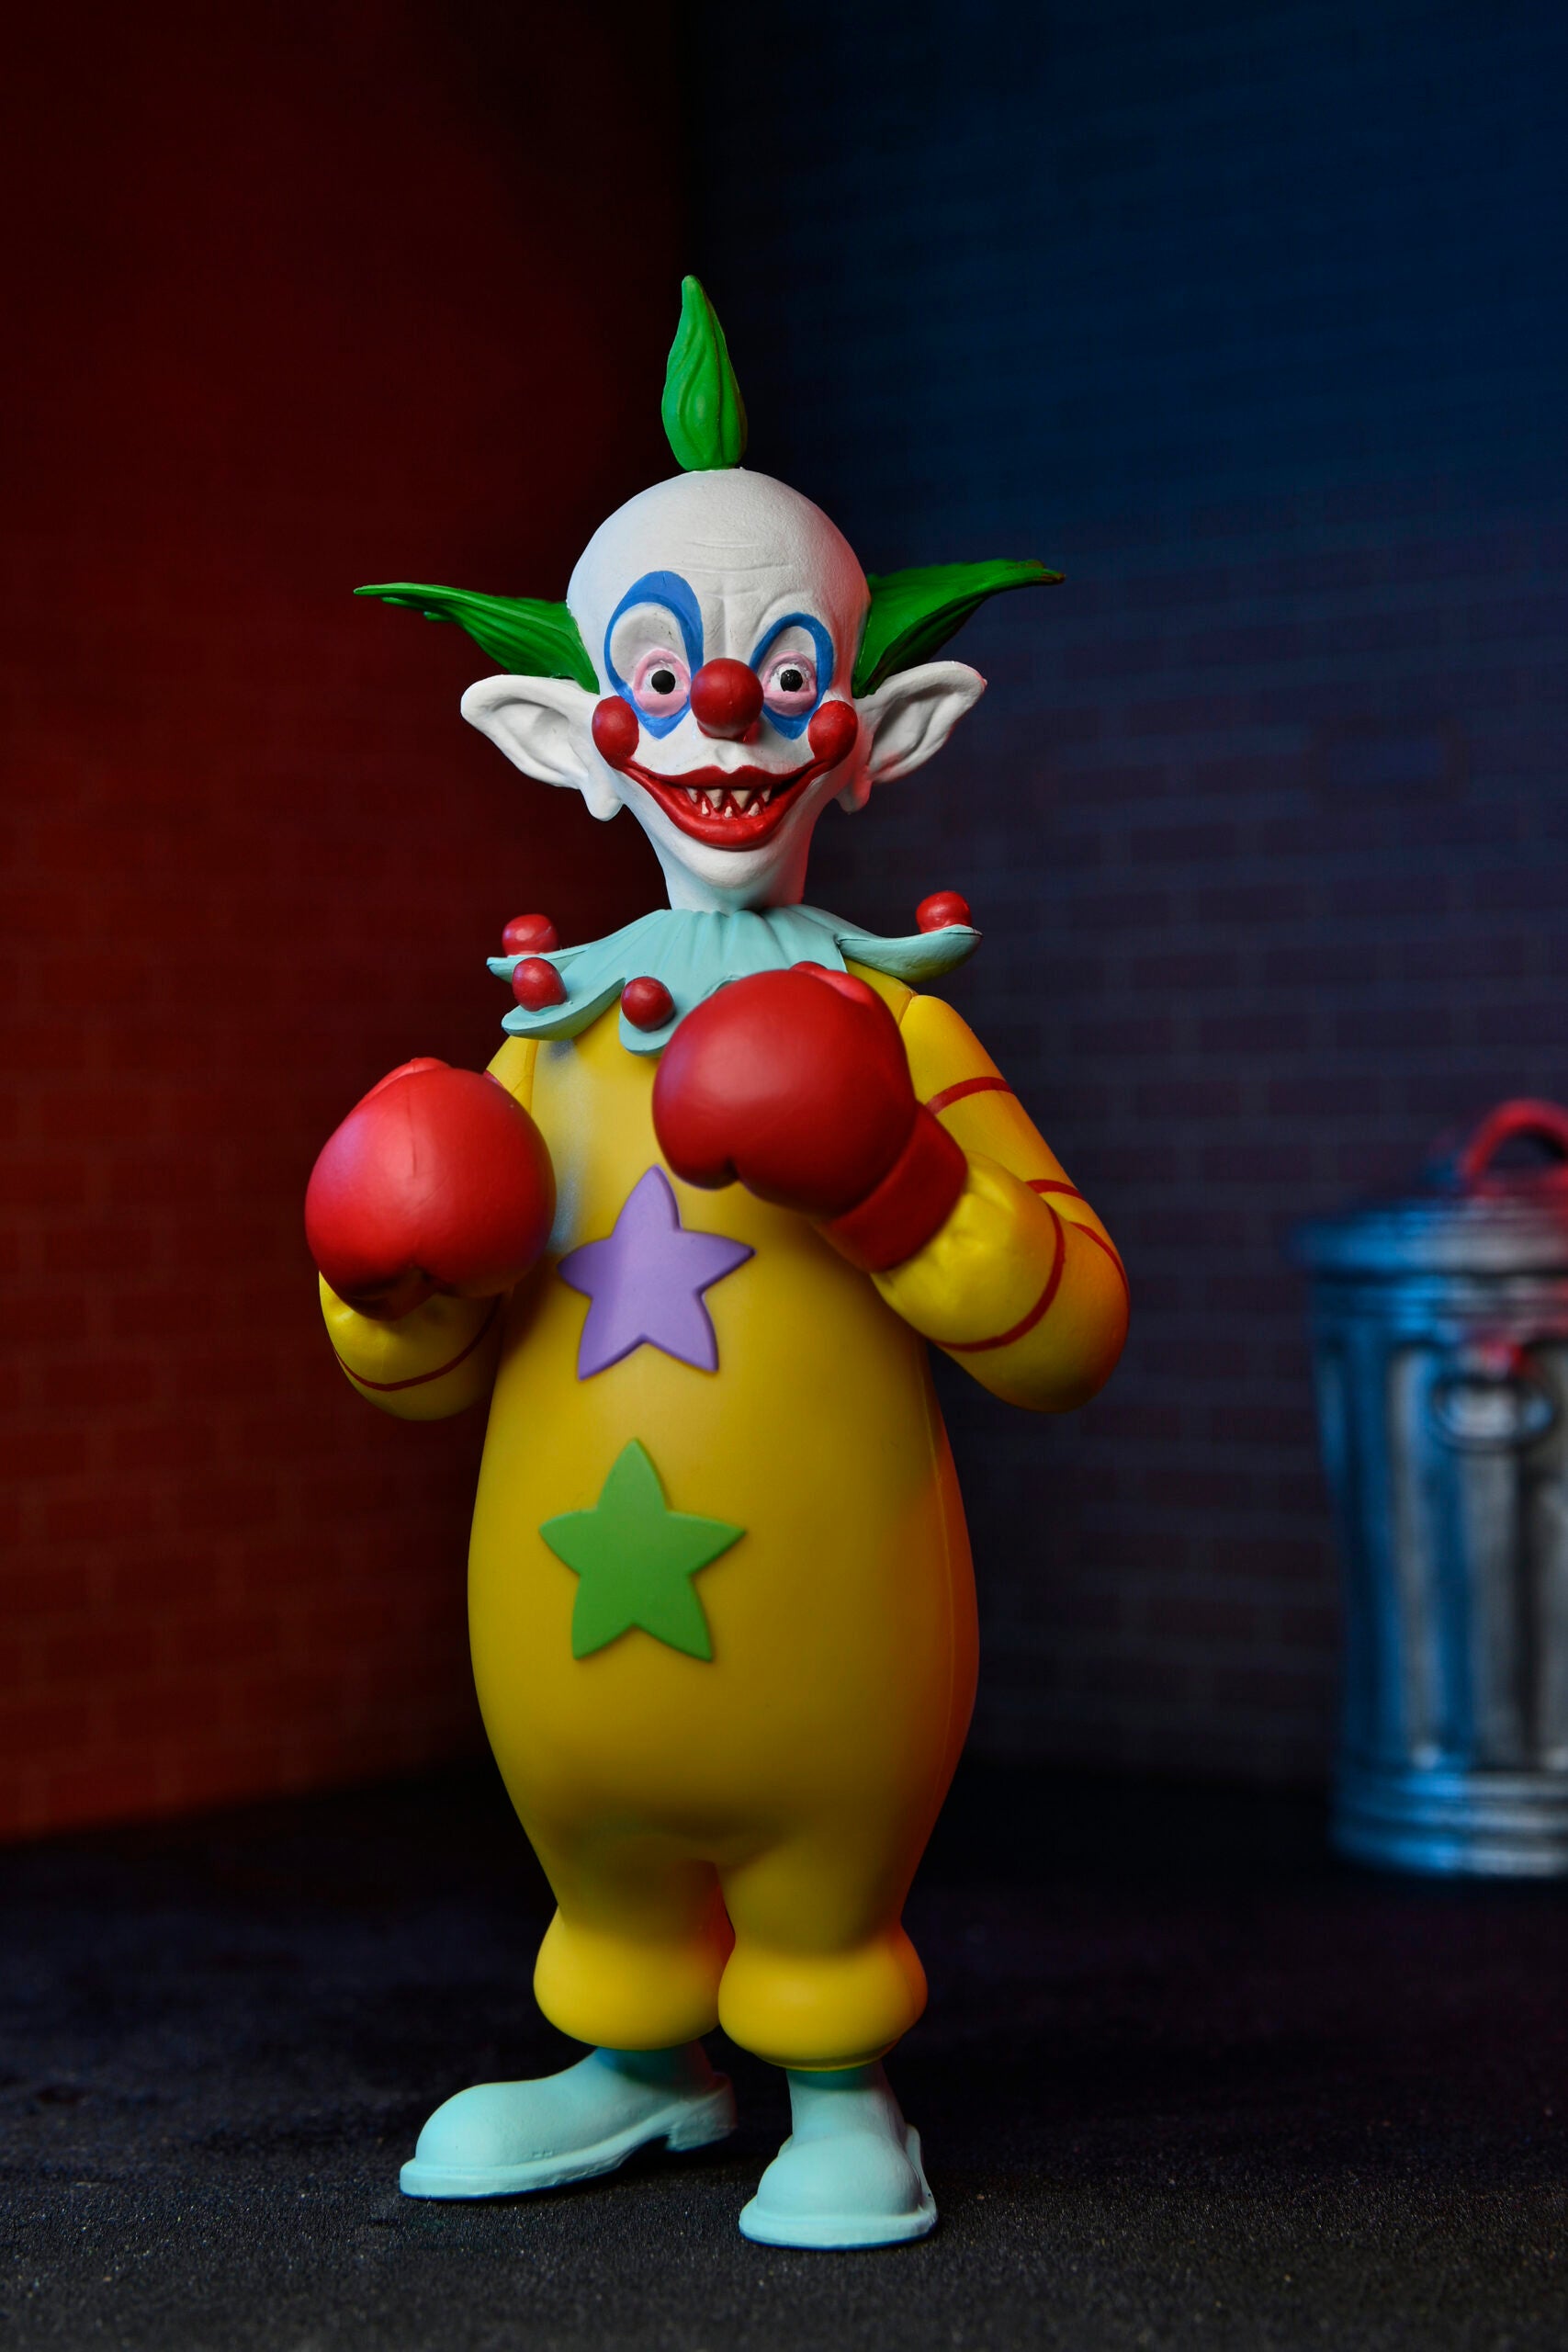 NECA - Toony Terrors Shorty (Killer Klowns From Outer Space) 6" Action Figure